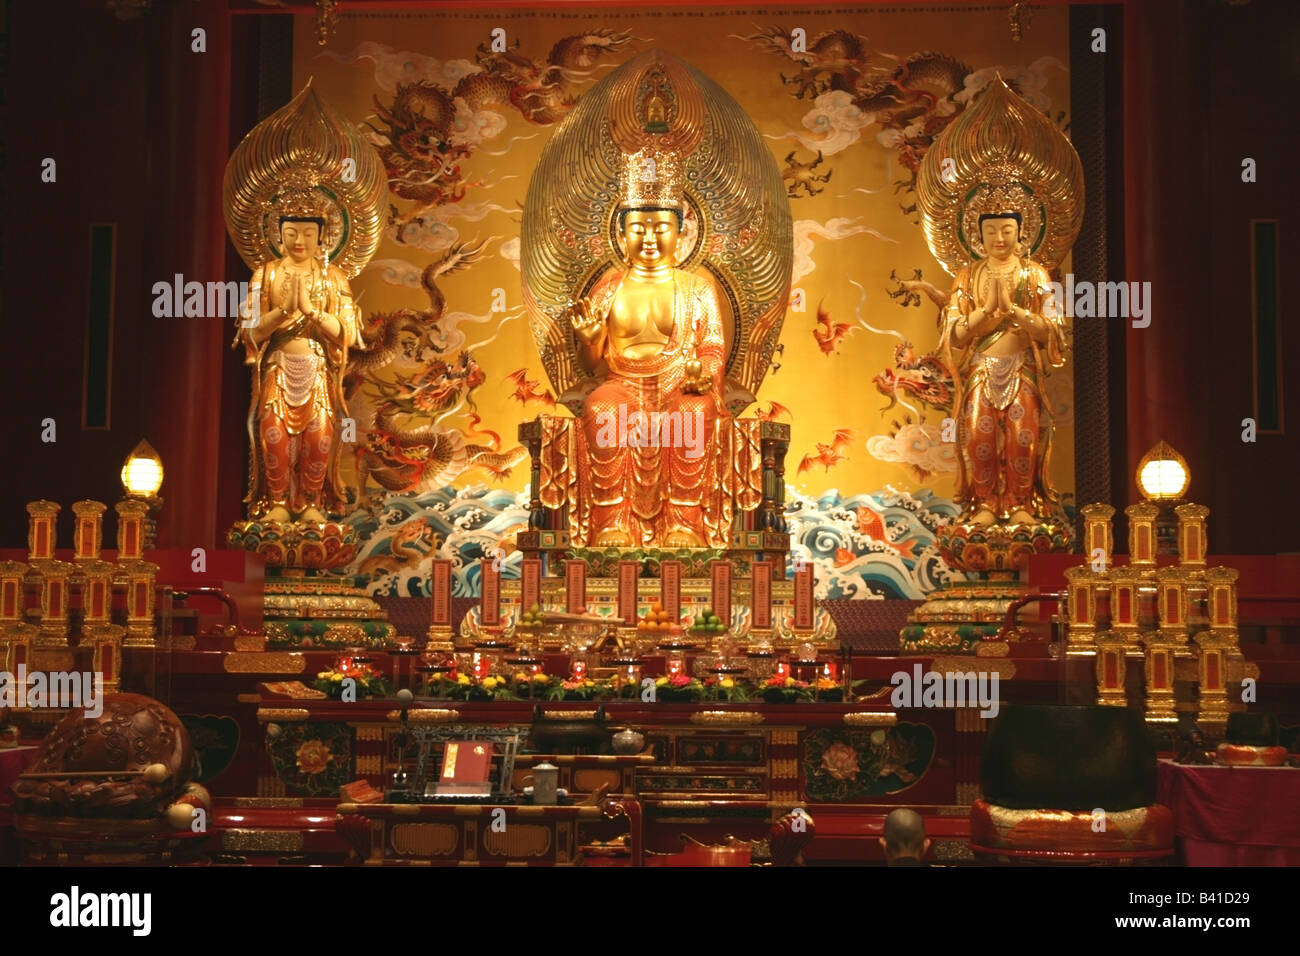 Buddha Statue and interior of The Buddha Tooth Relic temple, Singapore, South East Asia Stock Photo